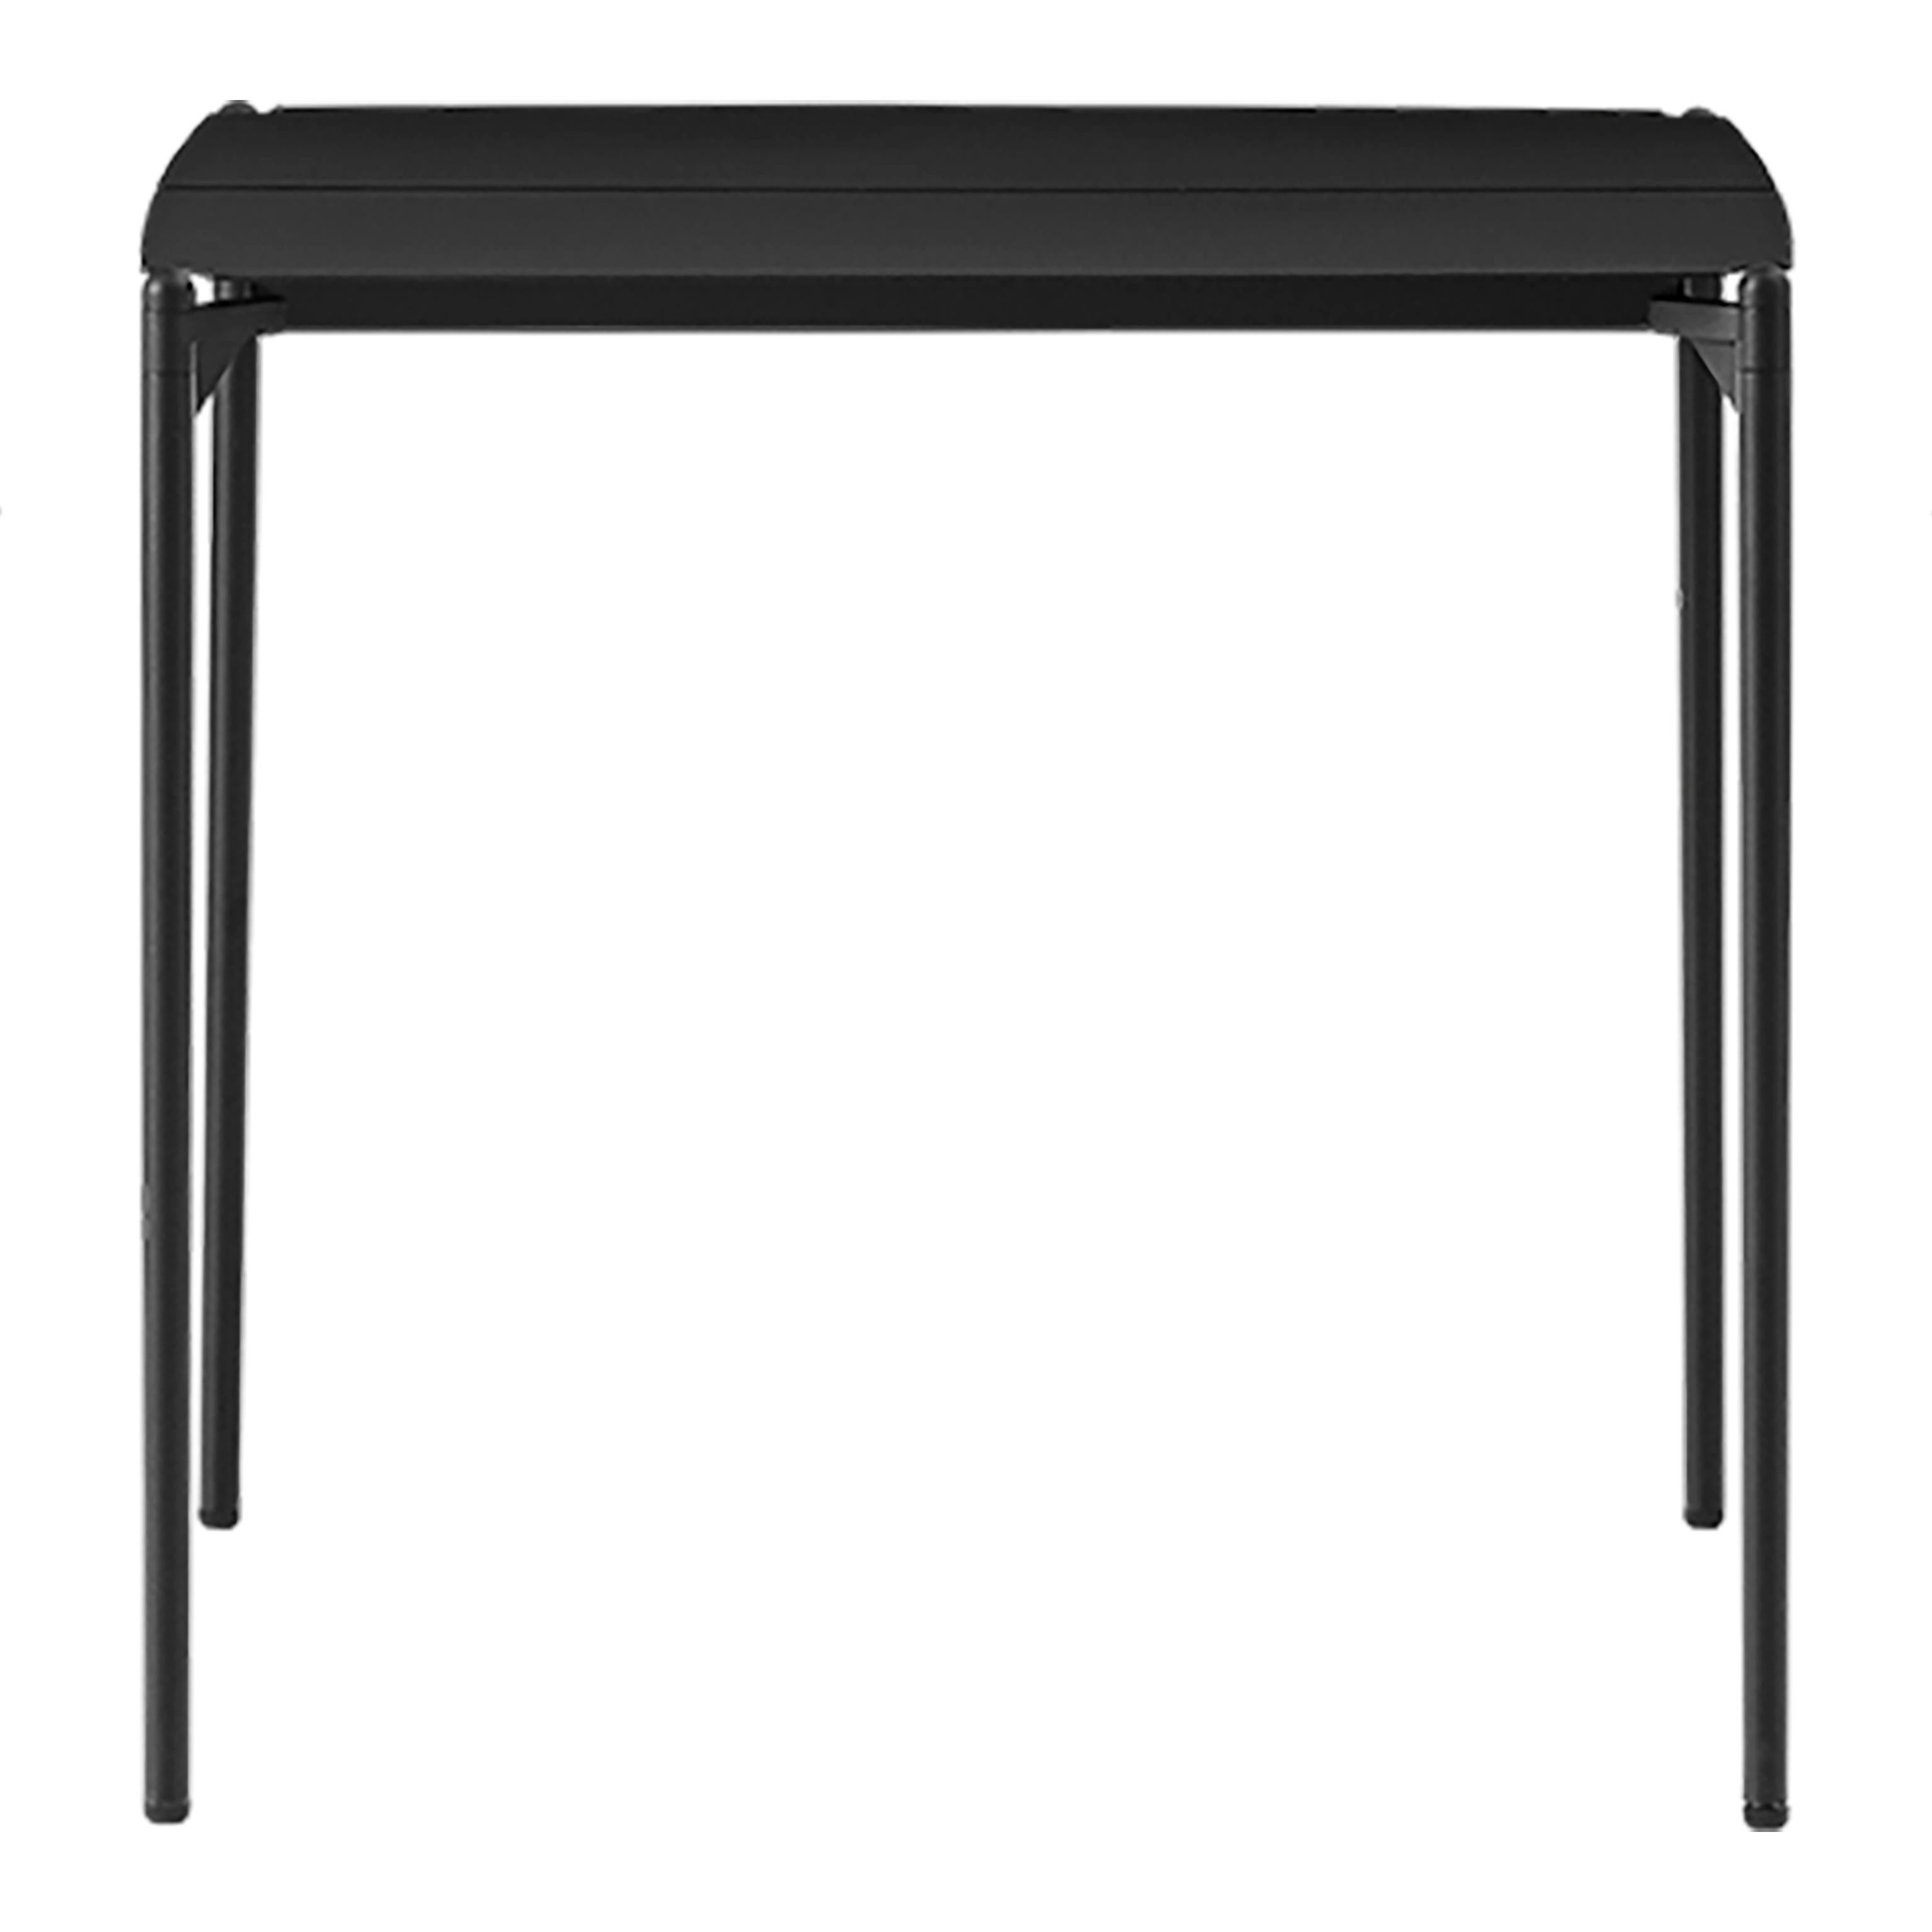 Small black Minimalist table
Dimensions: D 80 x W 80 x H 72 cm 
Materials: Steel w. matte powder coating & aluminum w. matte powder coating
Available in colors: Taupe, bordeaux, forest, ginger bread, black and, black and gold. 


Bring